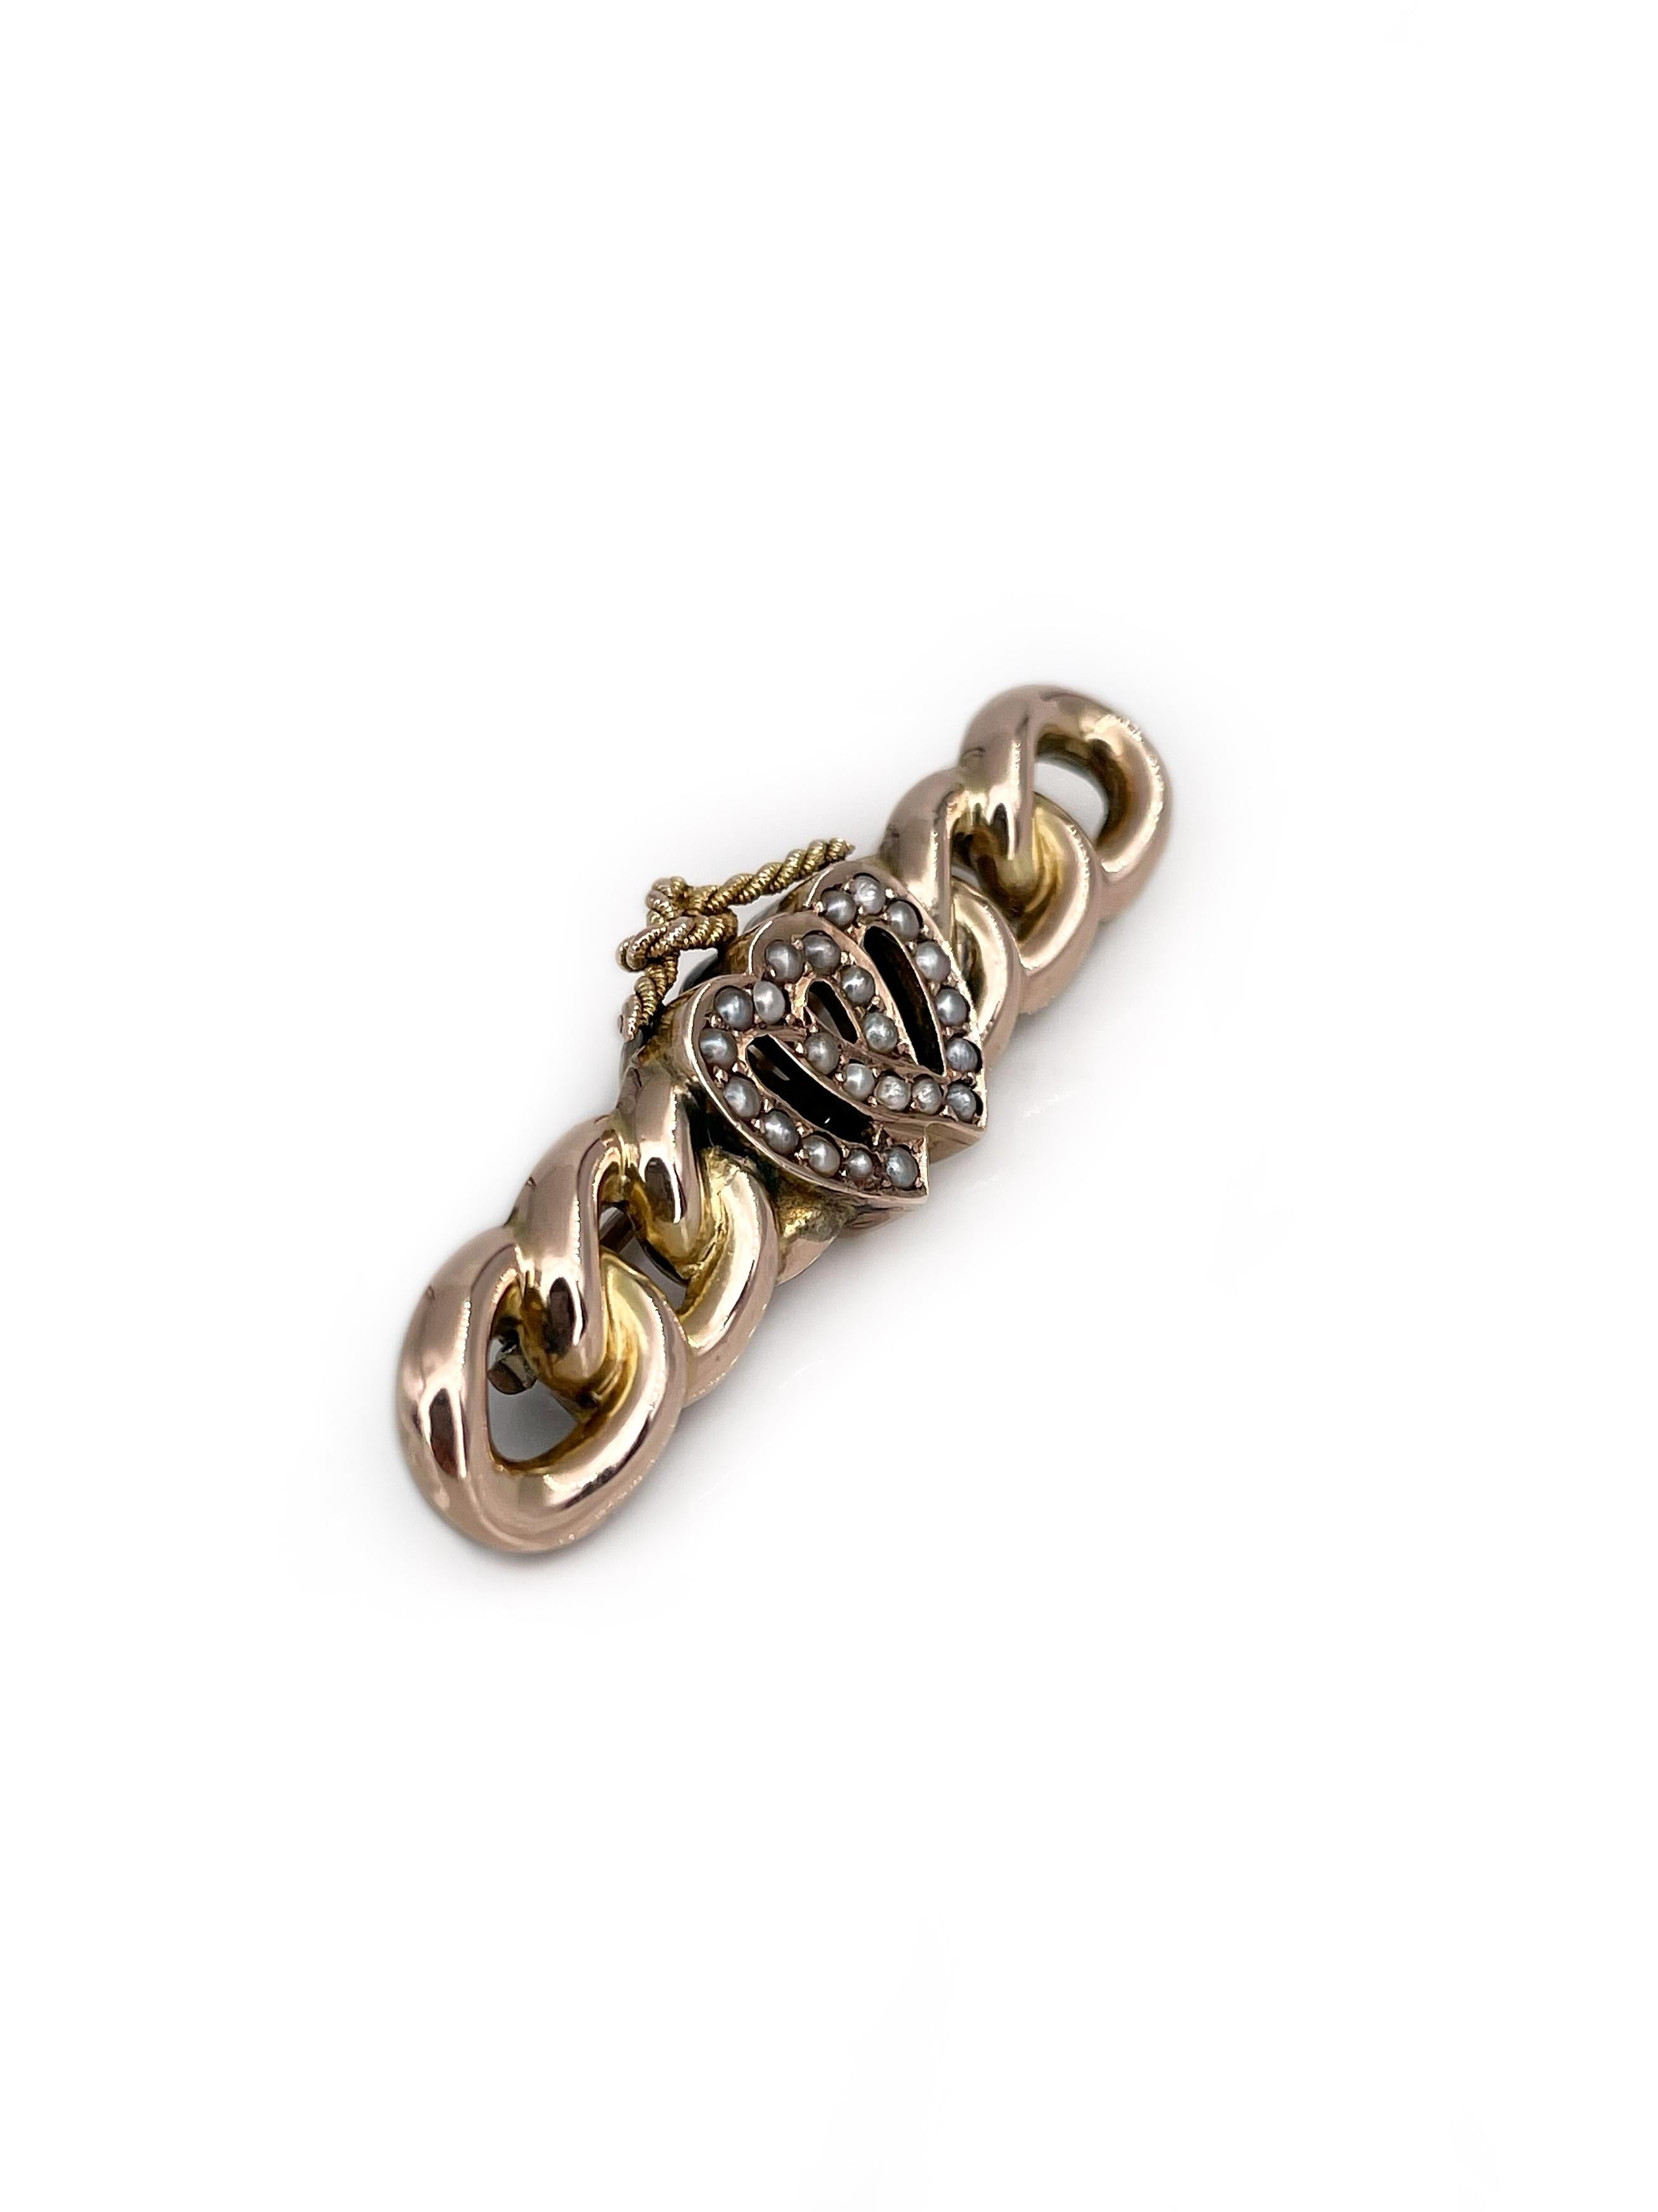 This is a Victorian double heart bar brooch crafted in 9K rose-yellow gold. The piece features seed pearls. 

Weight: 4.02g
Length: 5cm
Heart height: 1cm

———

If you have any questions, please feel free to ask. We describe our items accurately.